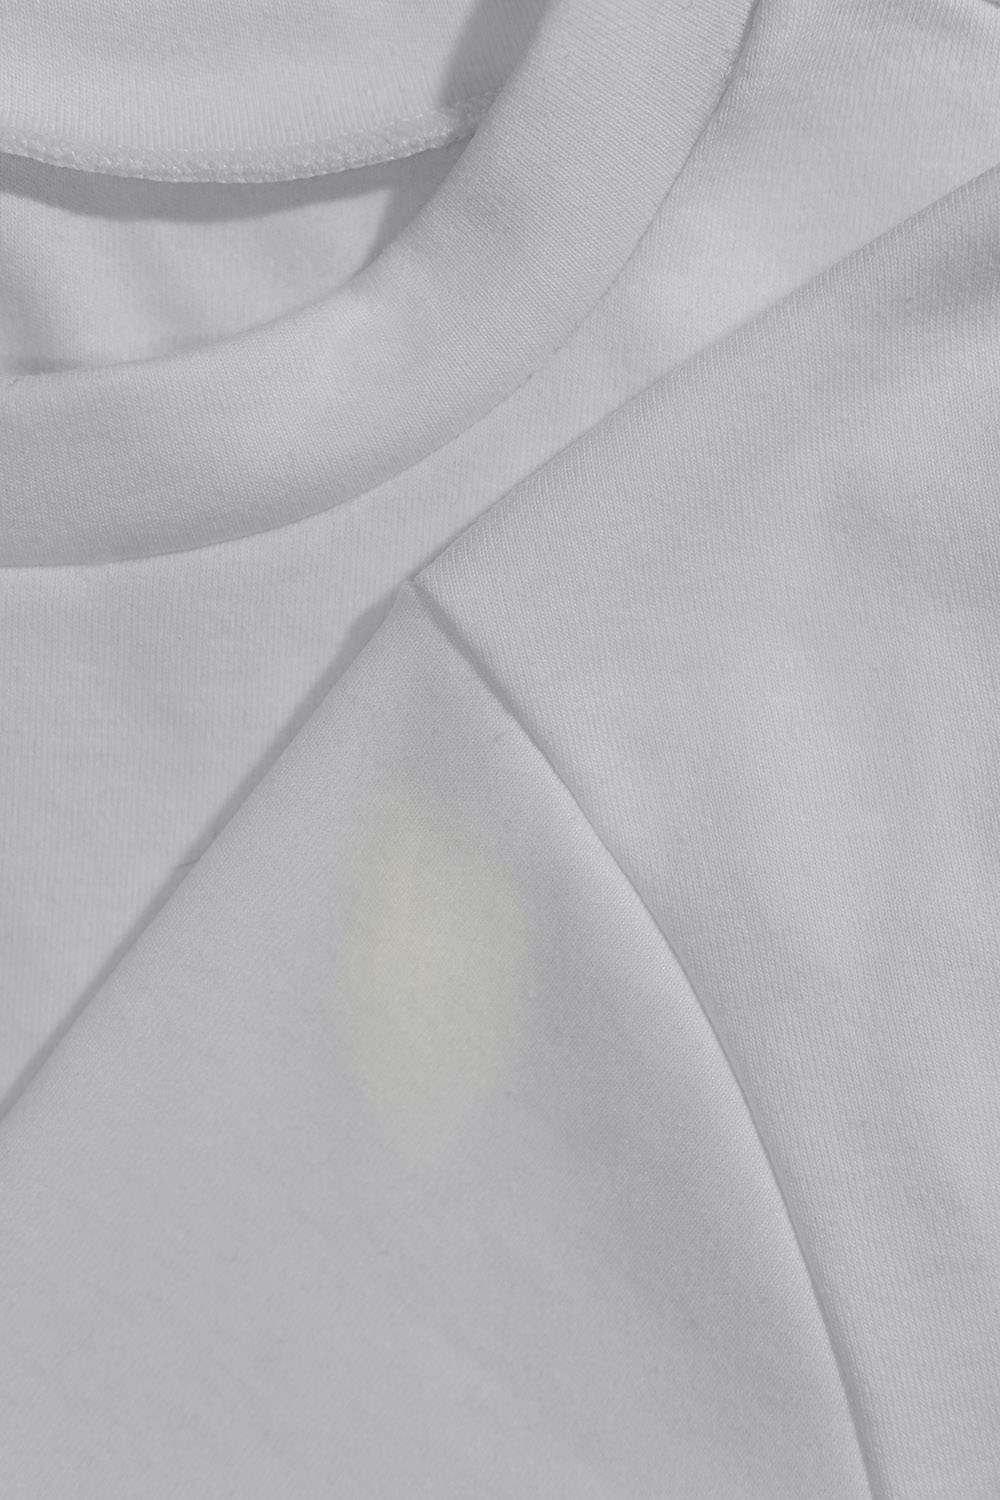 Wash Clothes Inside Out exposed stains